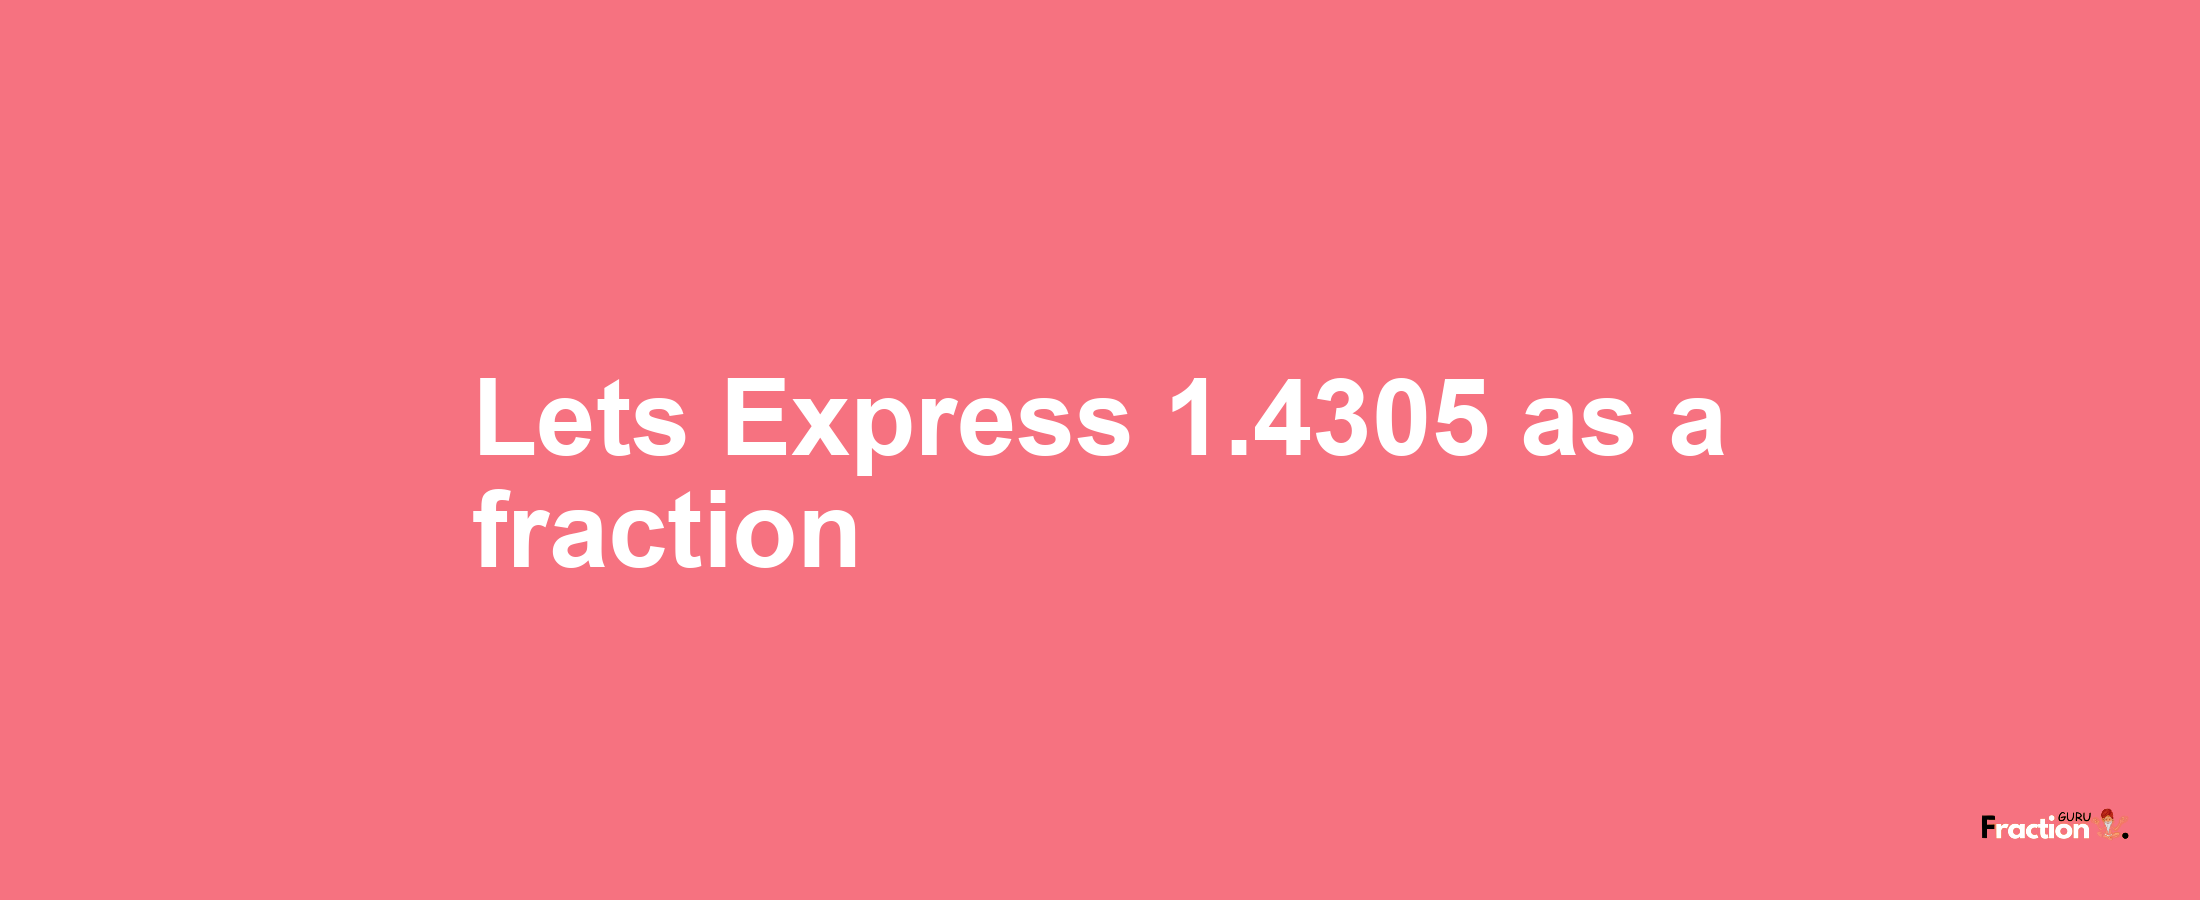 Lets Express 1.4305 as afraction